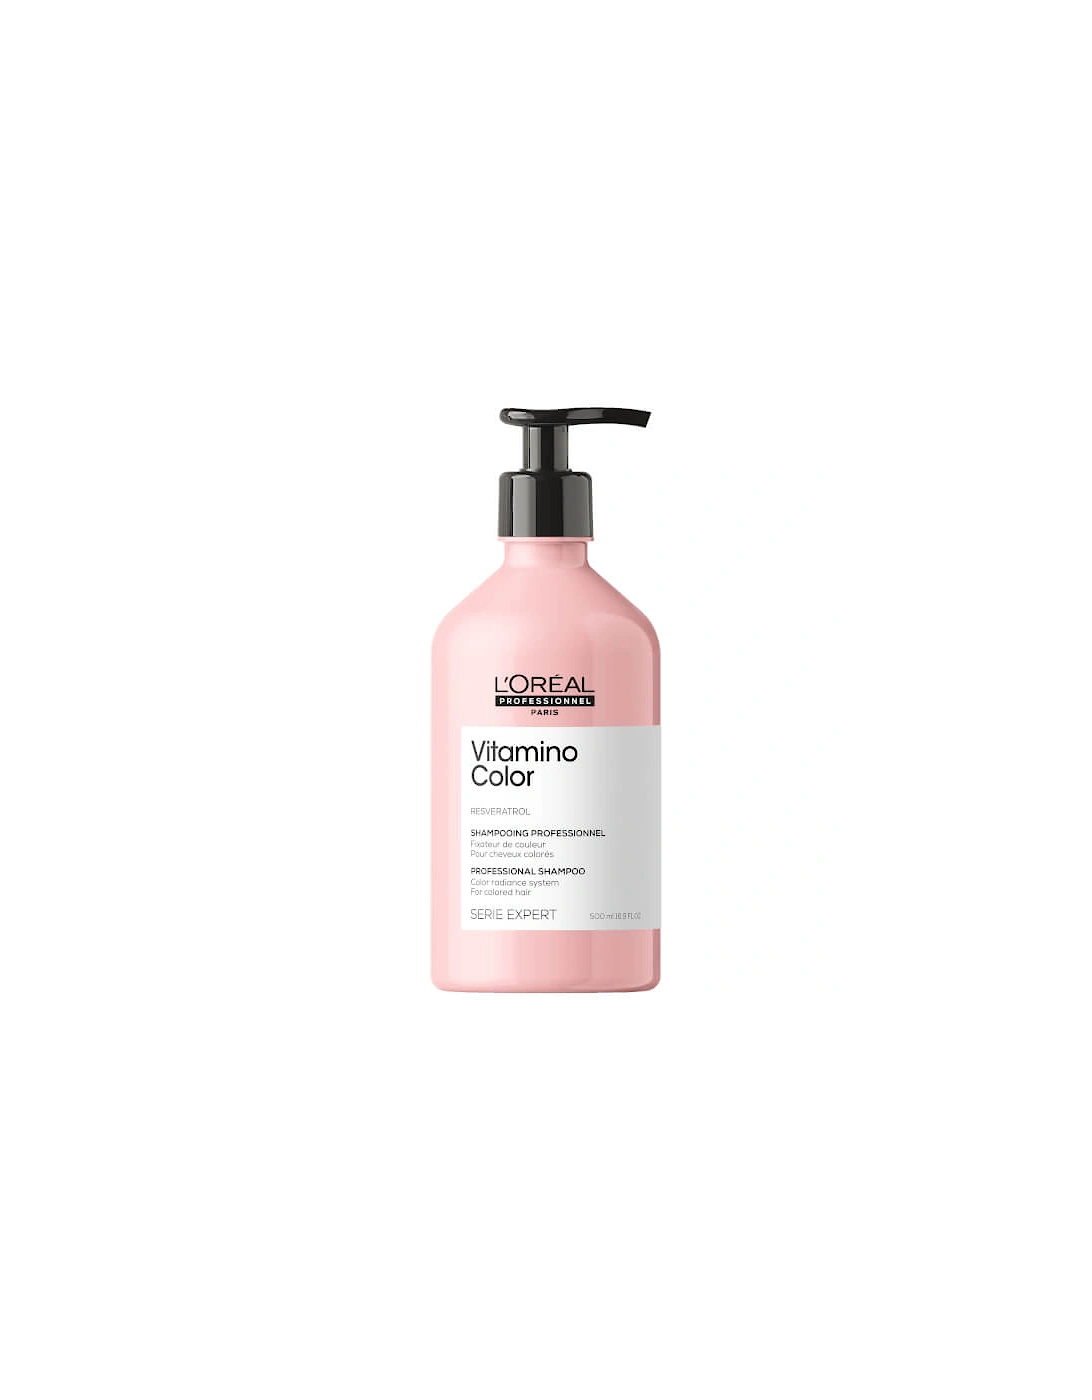 Professionnel Serié Expert Vitamino Color Shampoo For Coloured Hair 500ml, 2 of 1